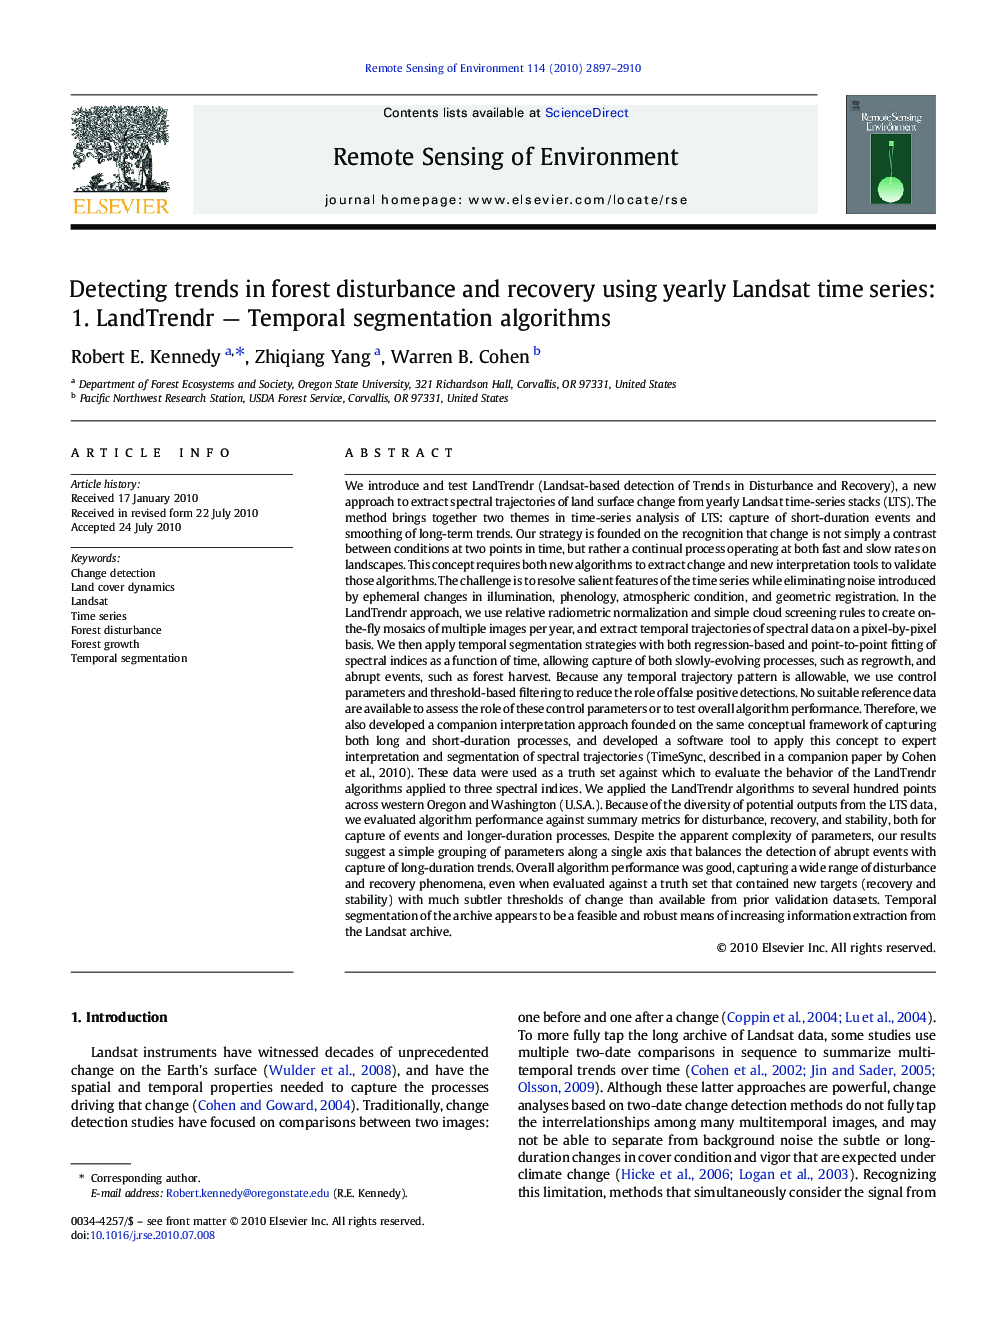 Detecting trends in forest disturbance and recovery using yearly Landsat time series: 1. LandTrendr — Temporal segmentation algorithms